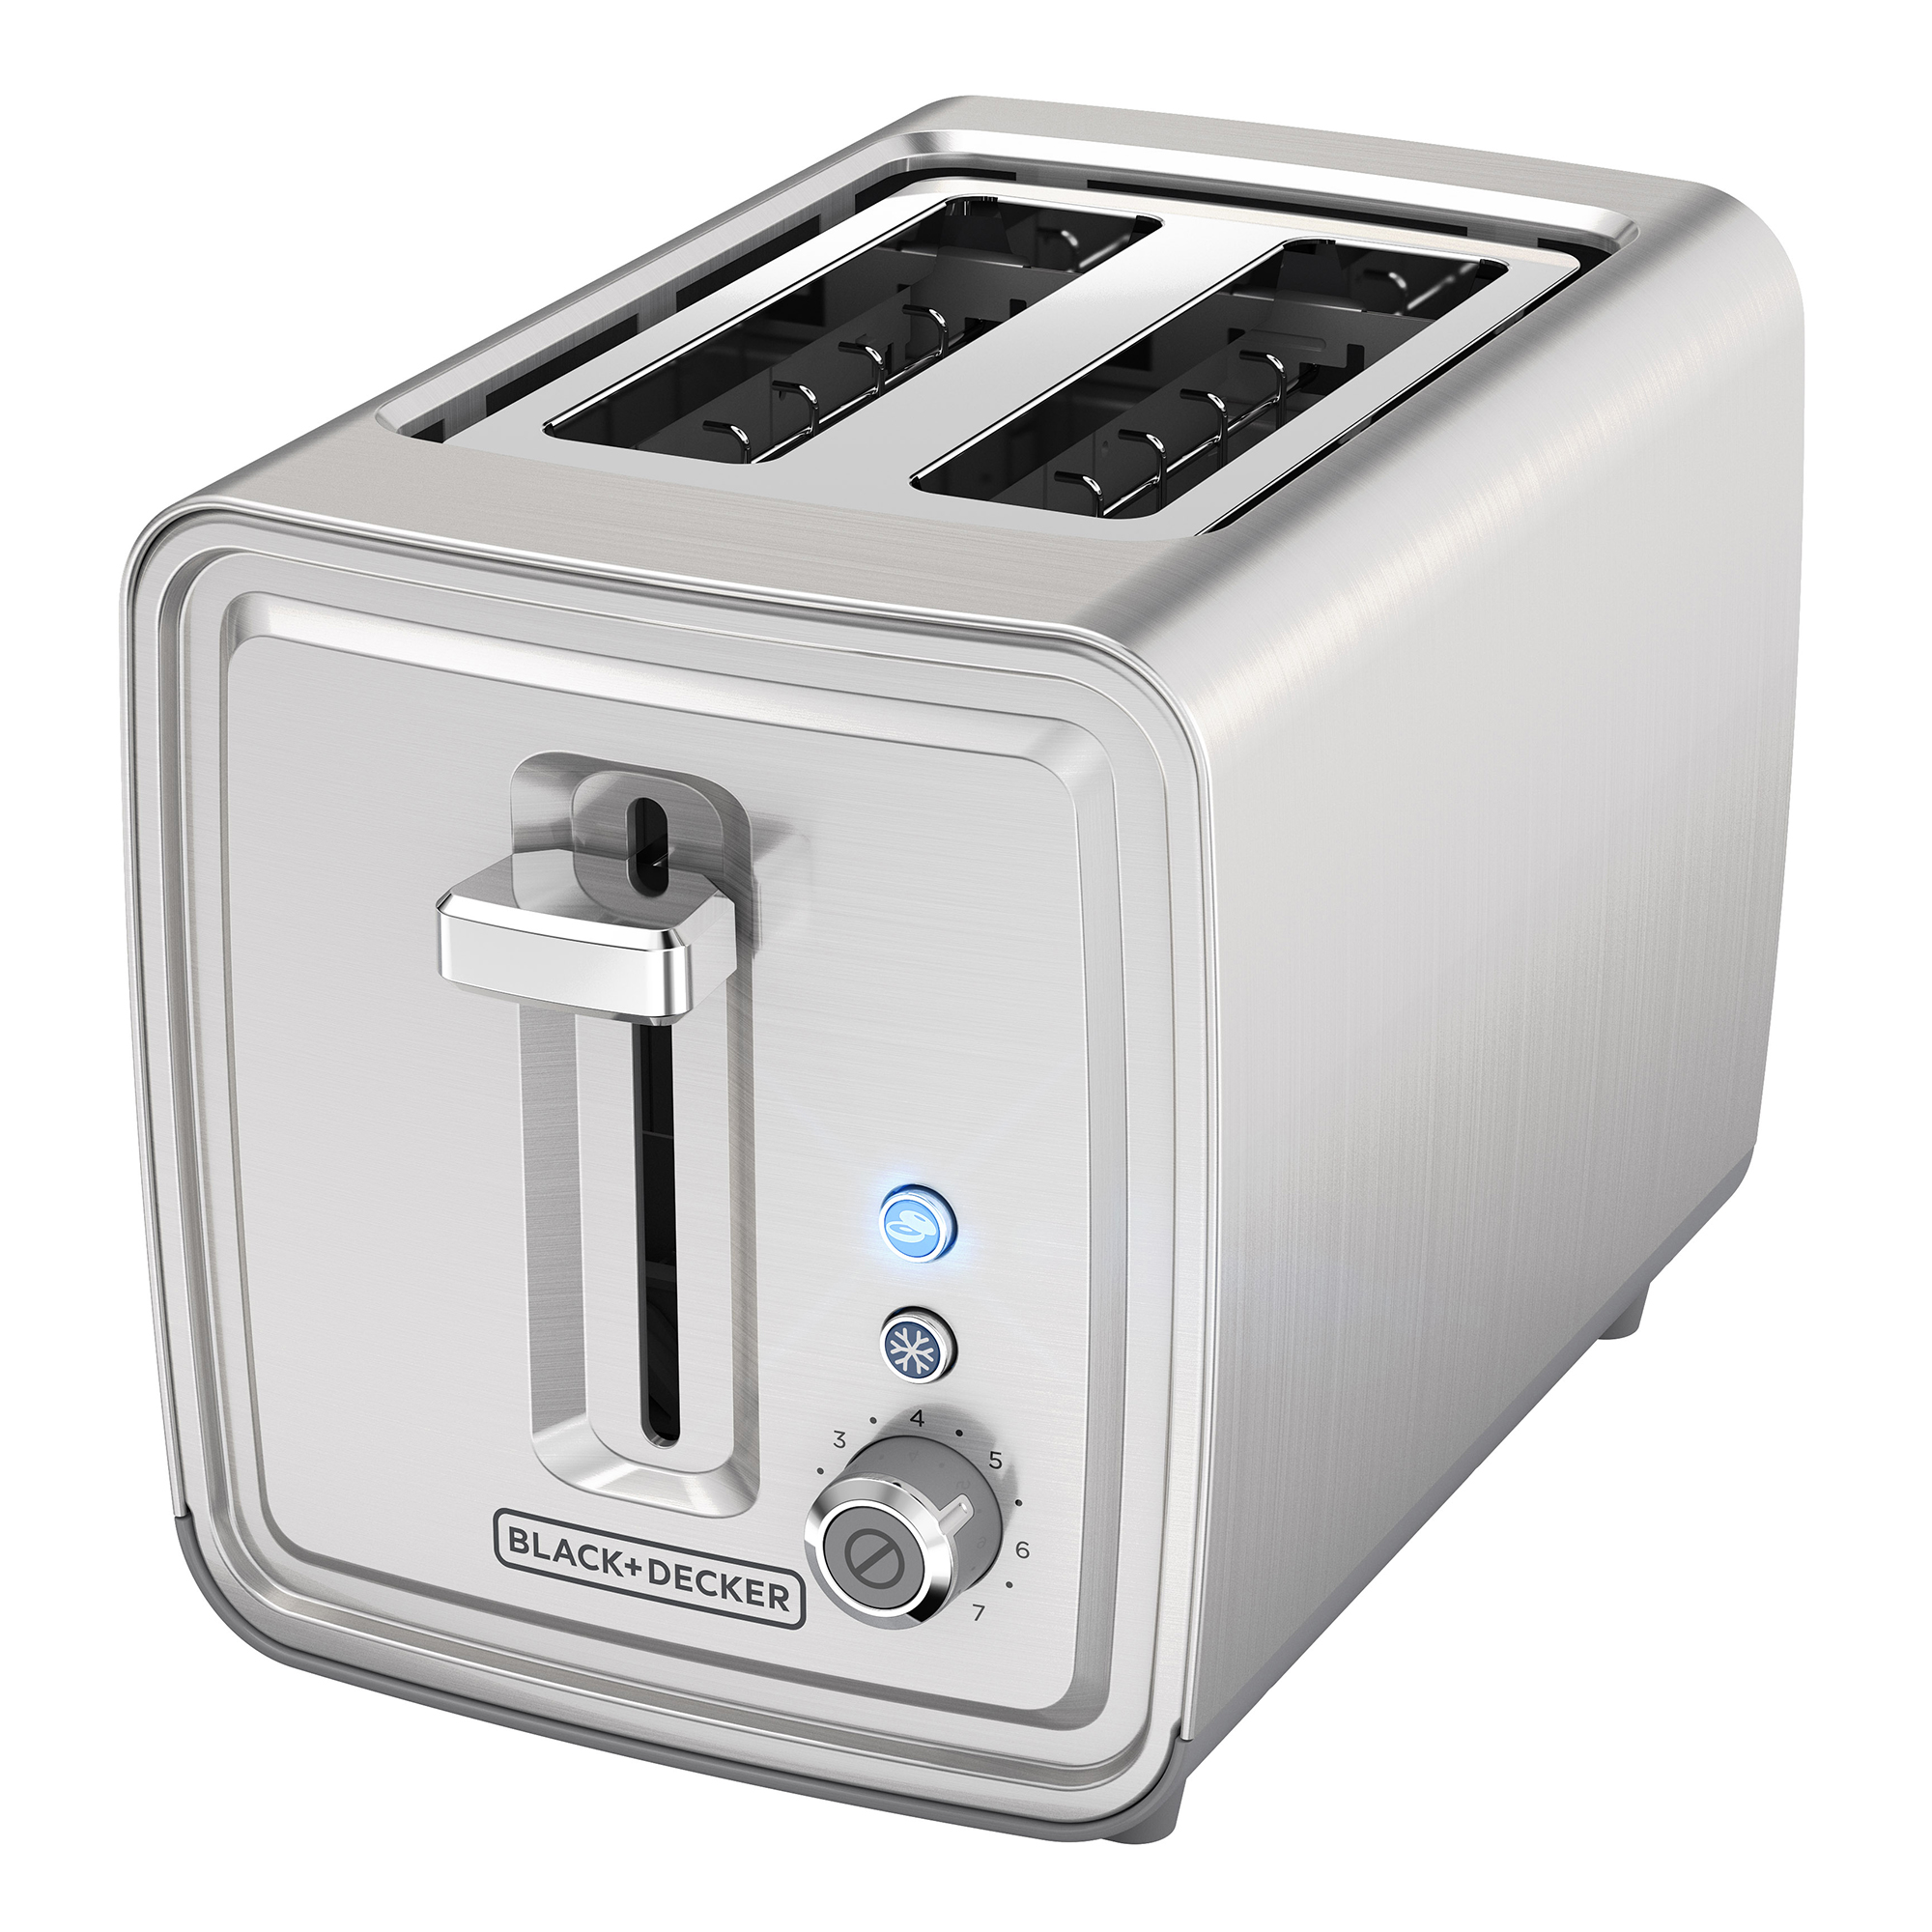  BLACK+DECKER 4-Slice Extra-Wide Slot Toaster, Stainless Steel,  TR4300SSD: Home & Kitchen